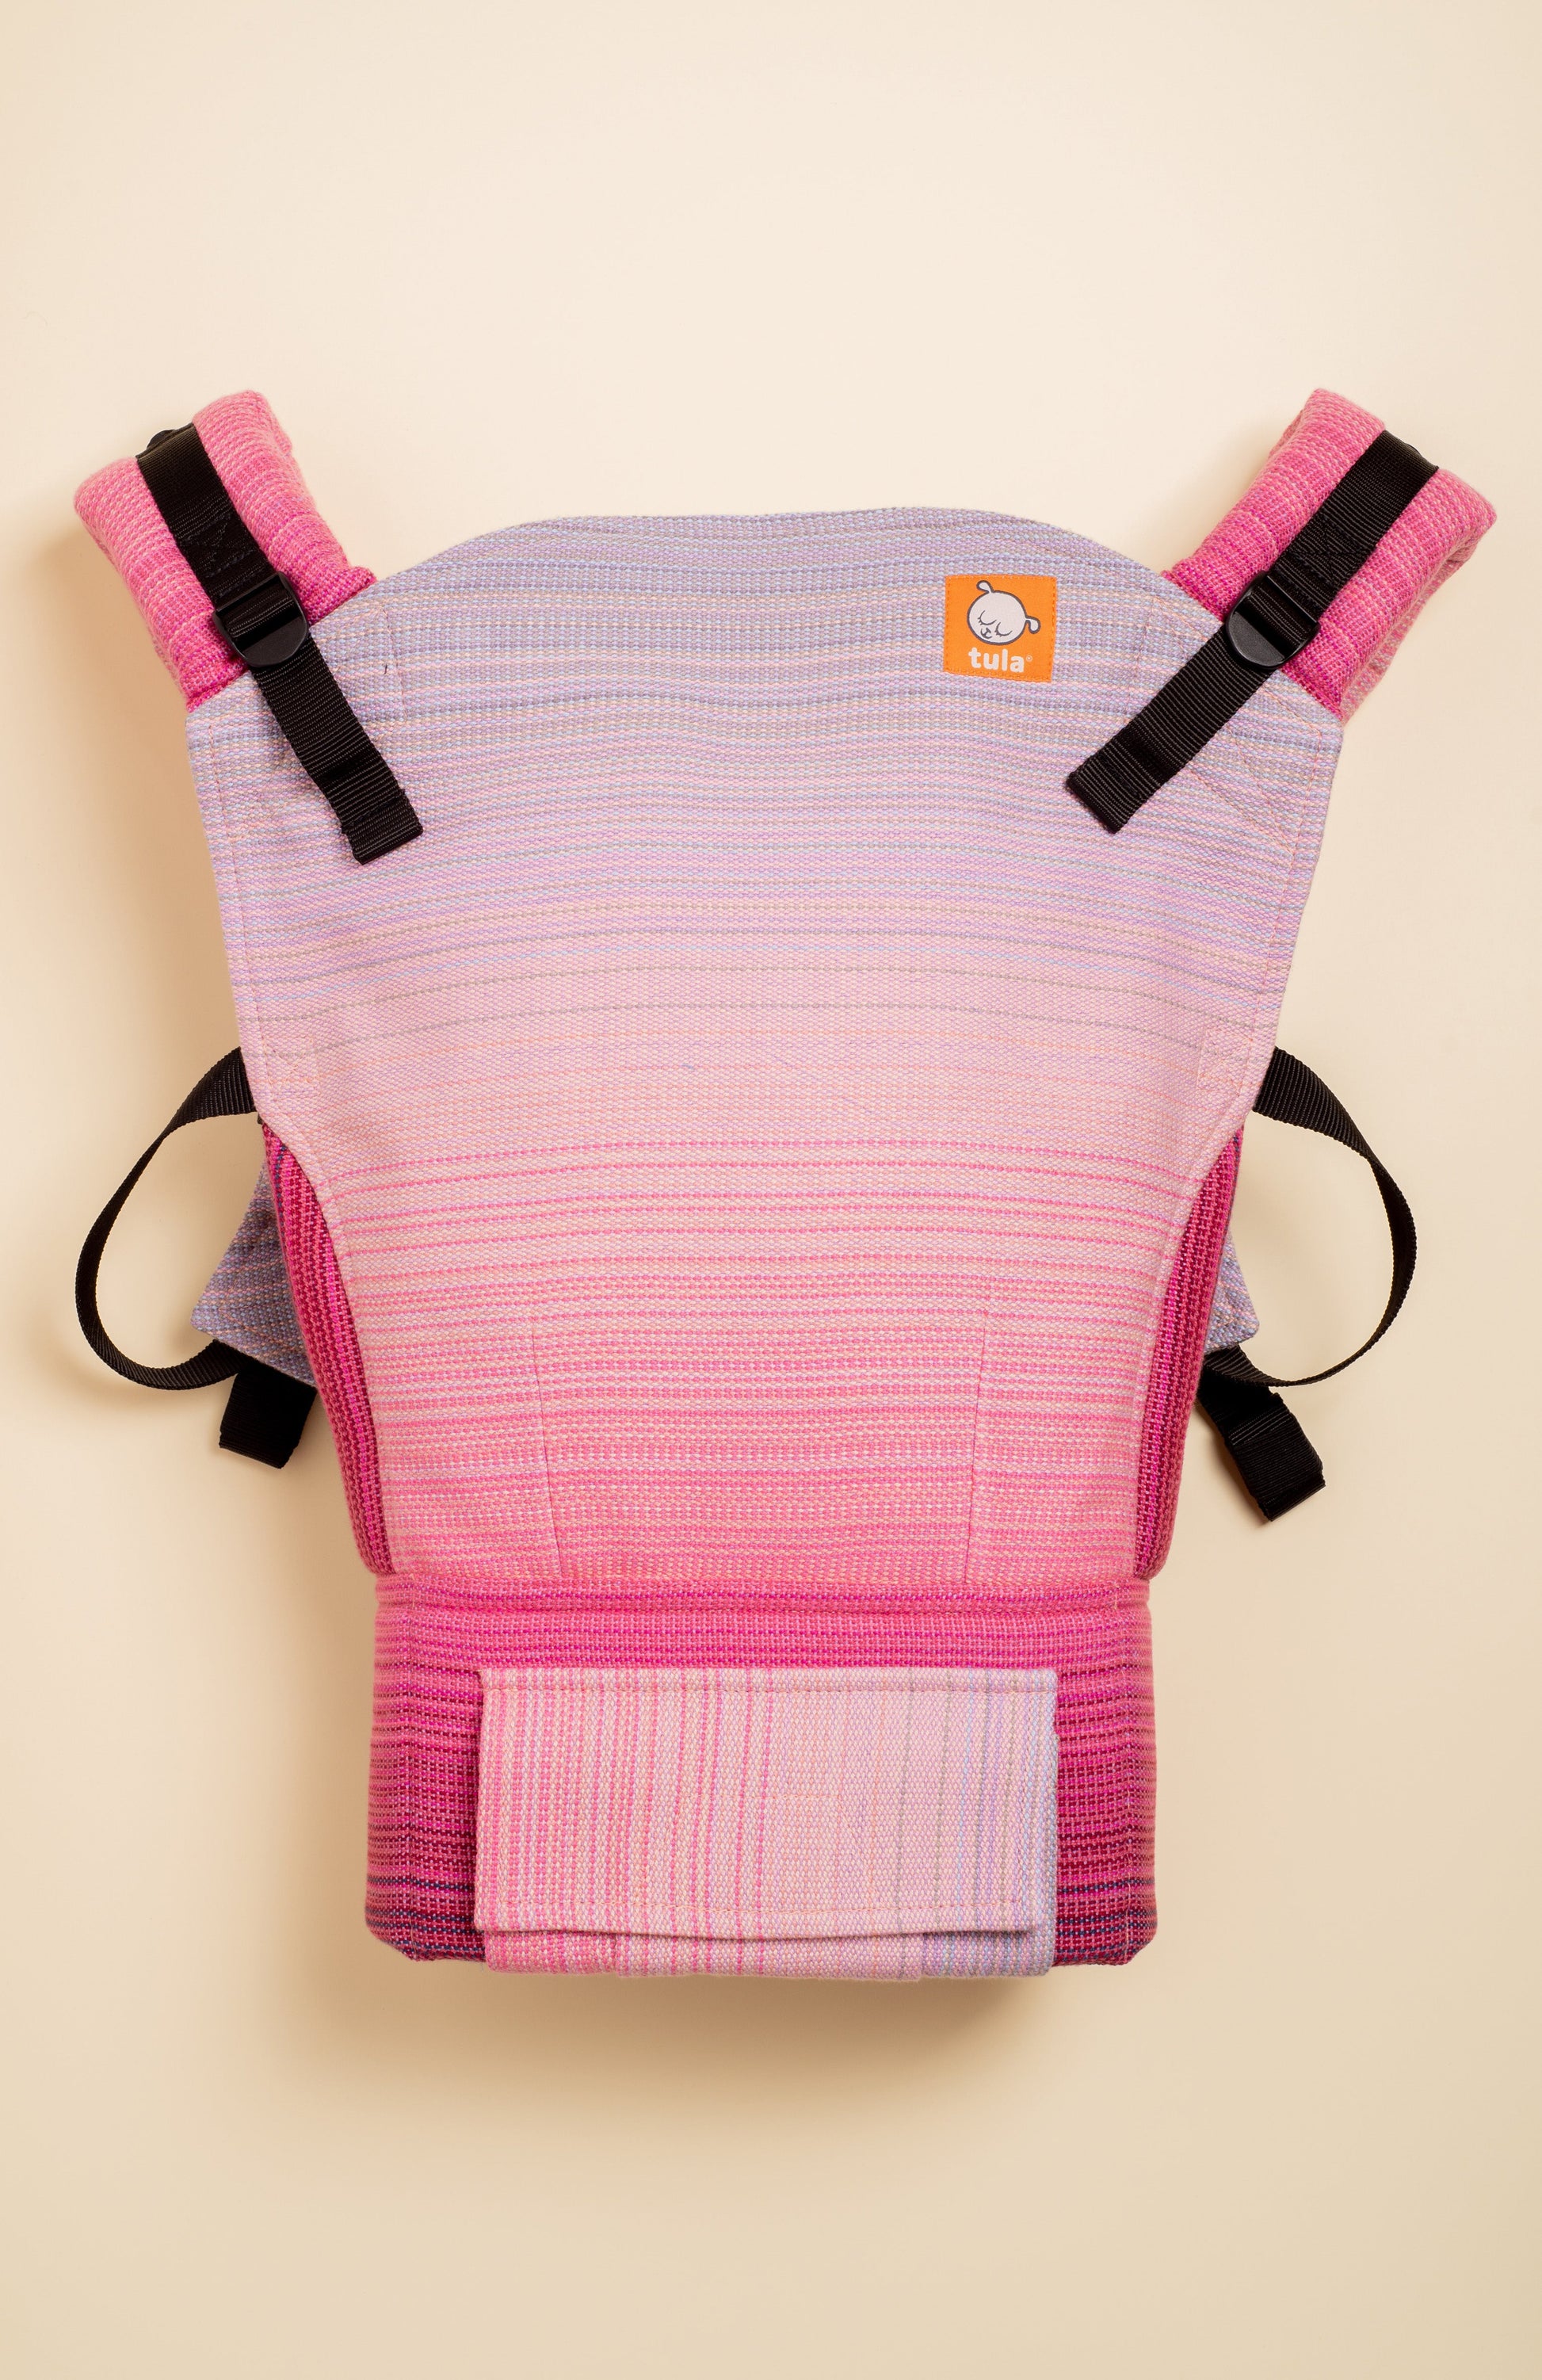 Something Very Small and Very Sweet - Signature Woven Standard Baby Carrier